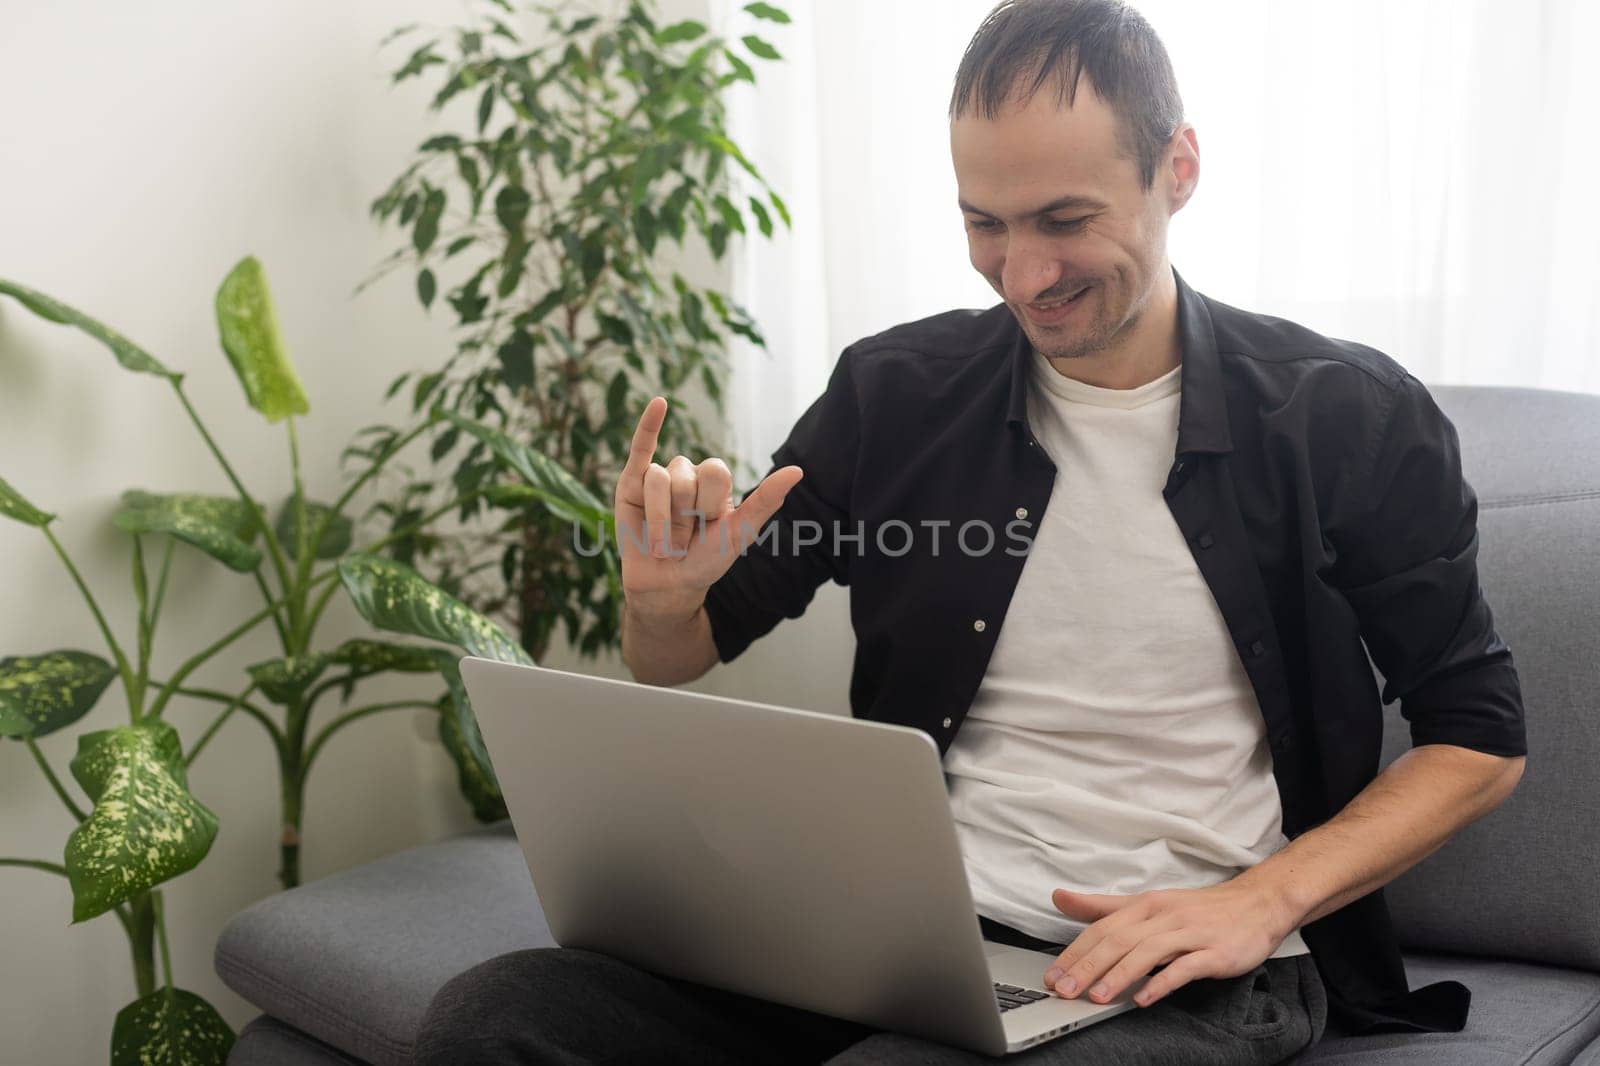 Deaf or hard hearing happy smiling young caucasian man uses sign language while video call using laptop while sitting on the couch at home